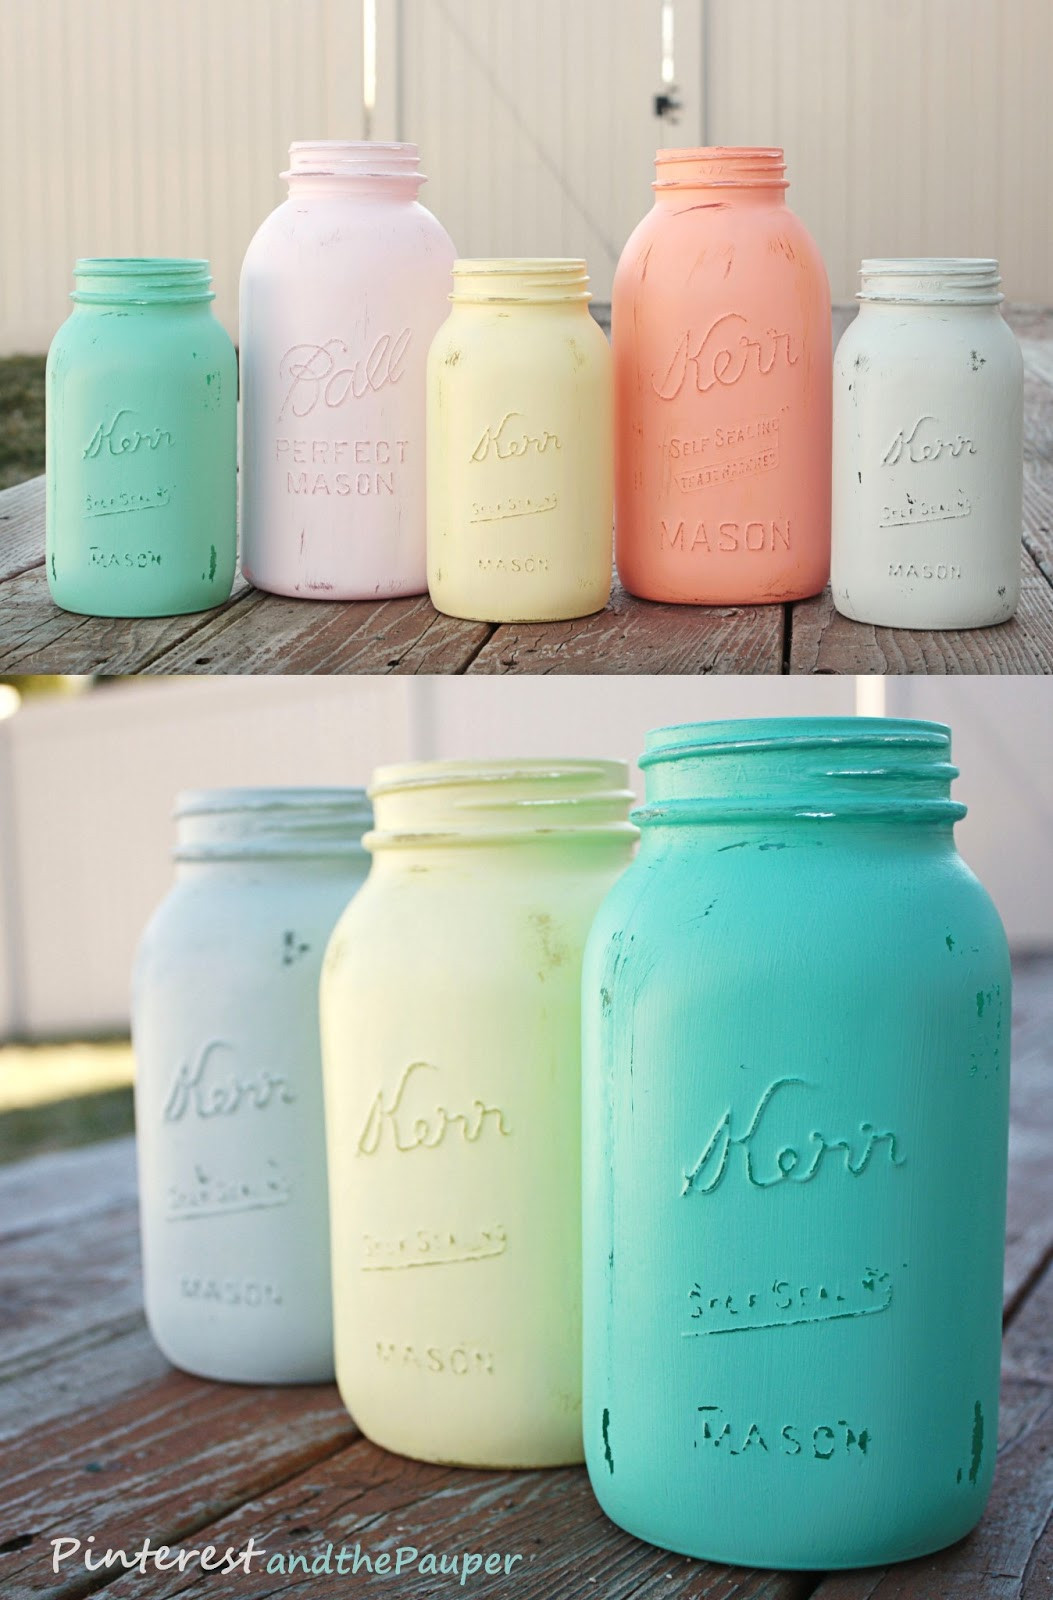 Best ideas about DIY Painted Mason Jars
. Save or Pin Pinterest and the Pauper DIY Painted Mason Jars Now.